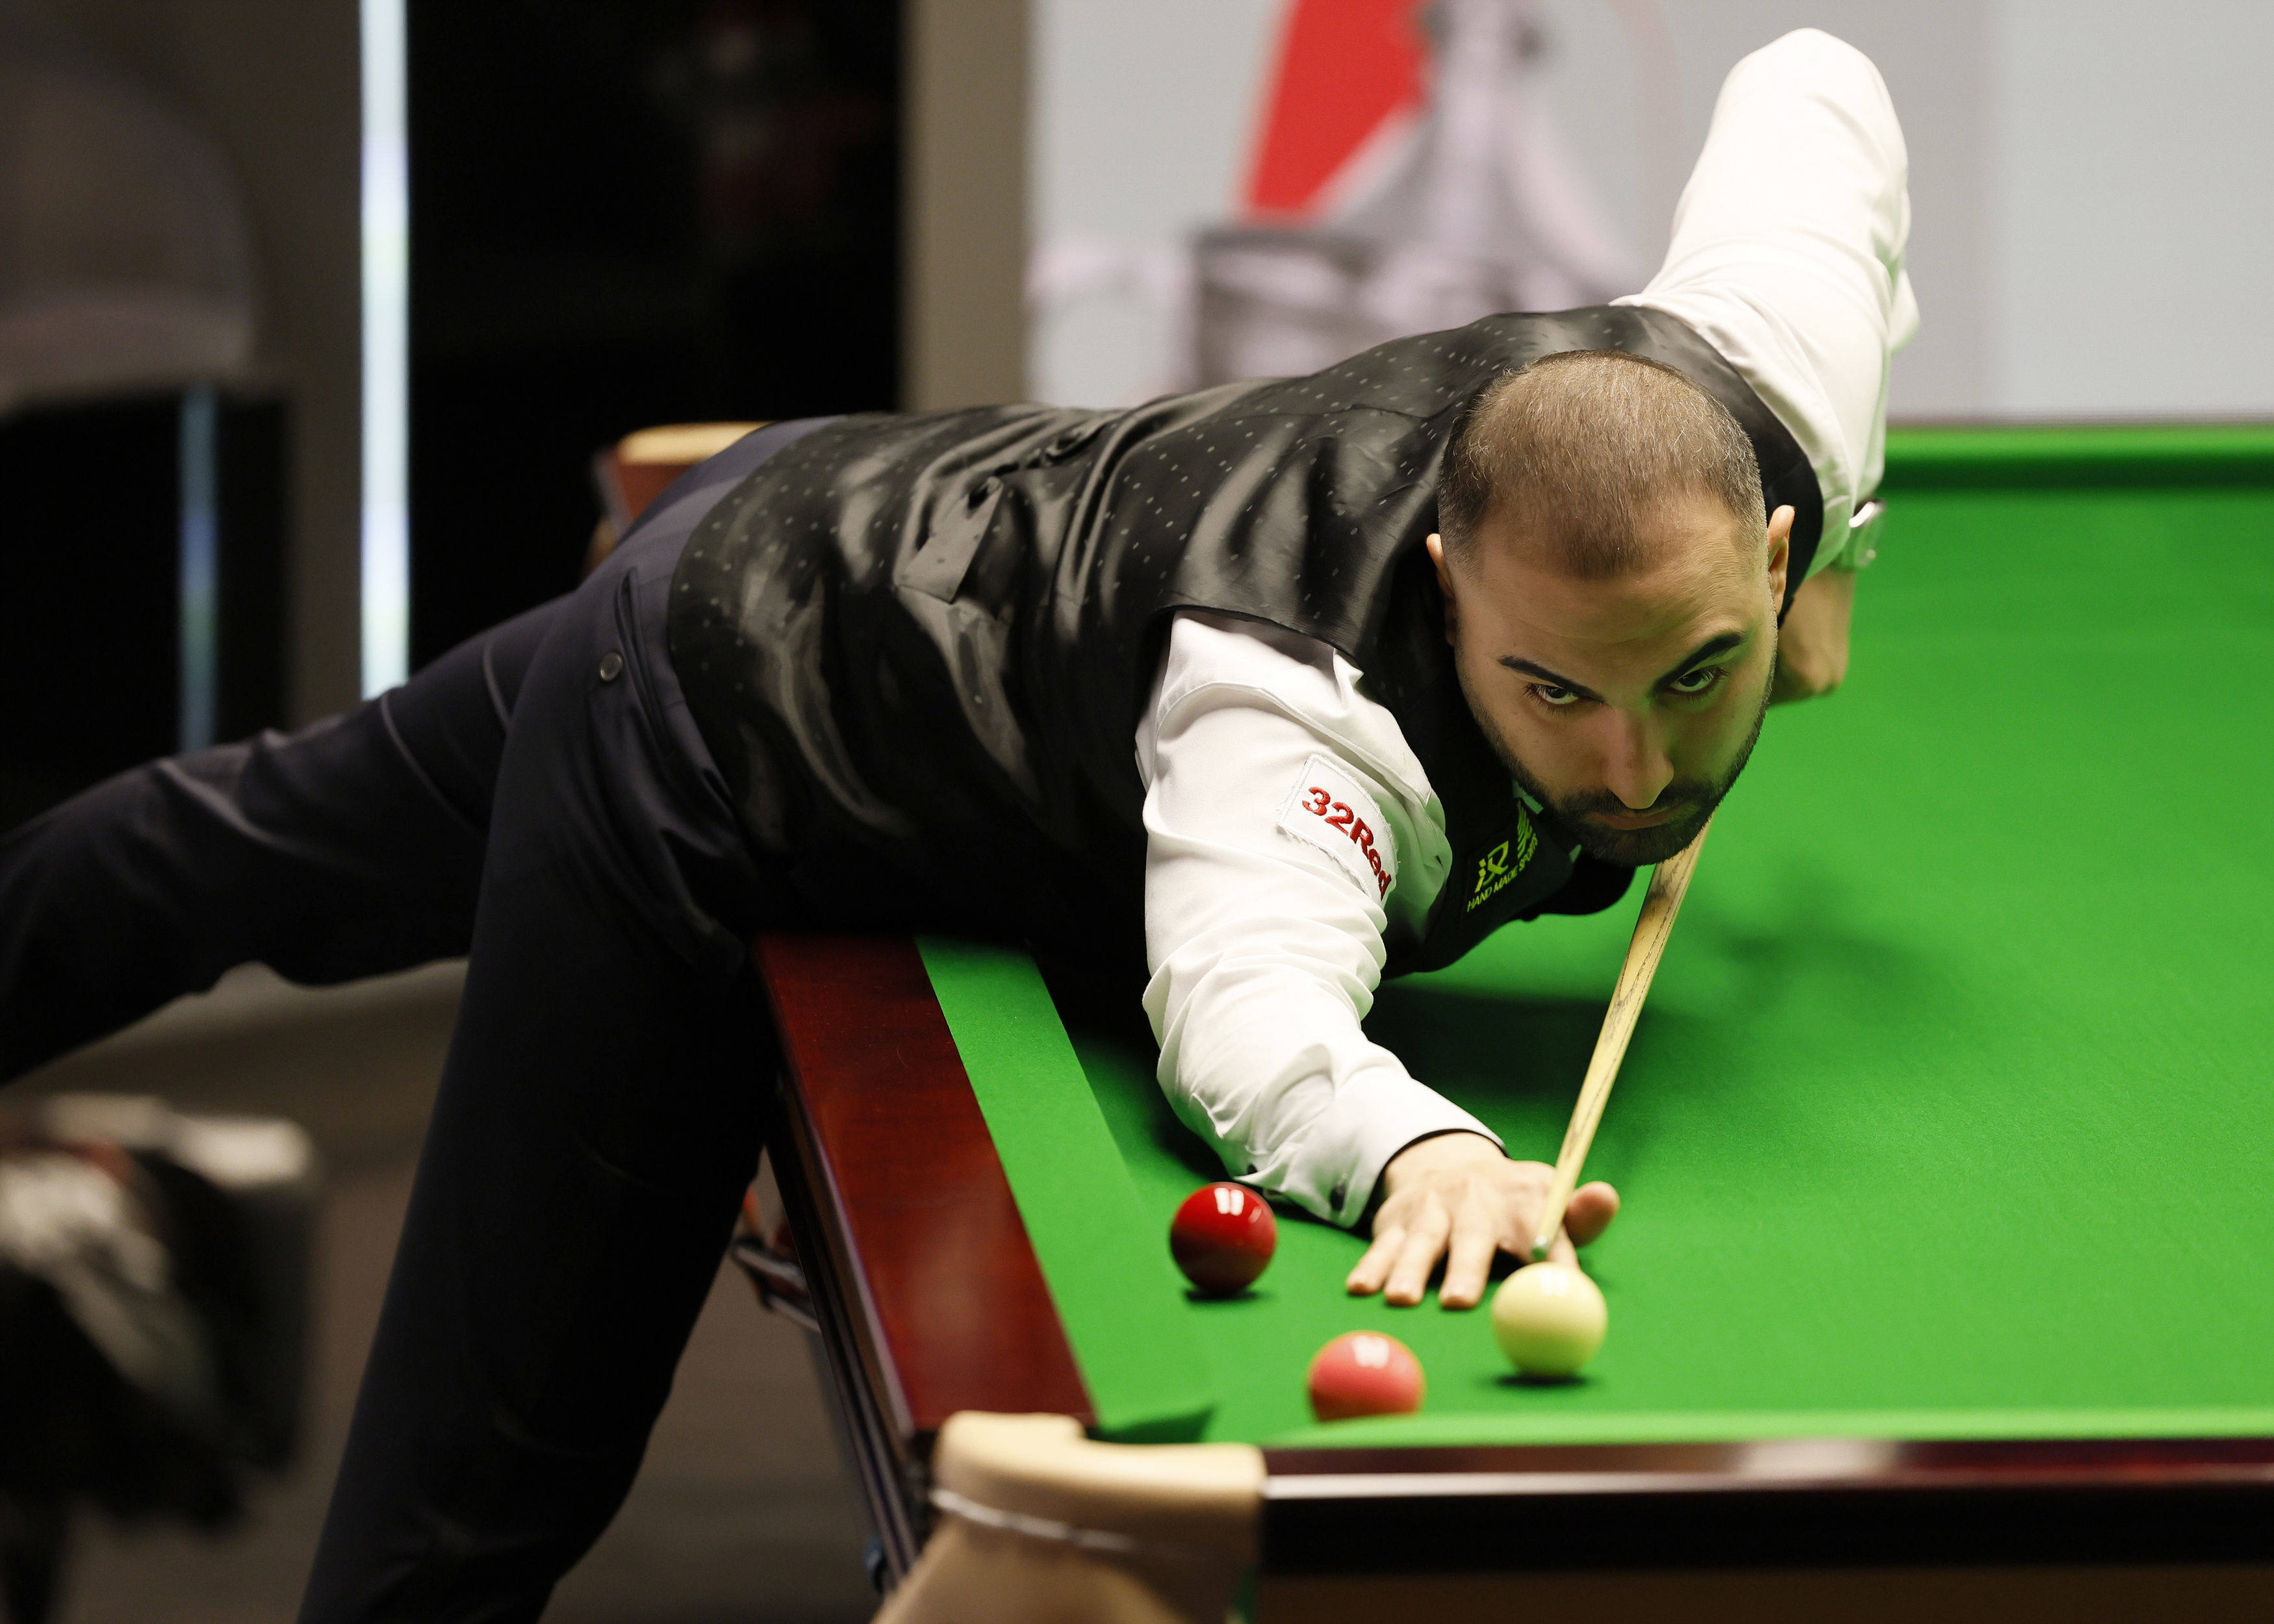 Hossein Vafaei was very critical of the Crucible following his defeat to Judd Trump: AP